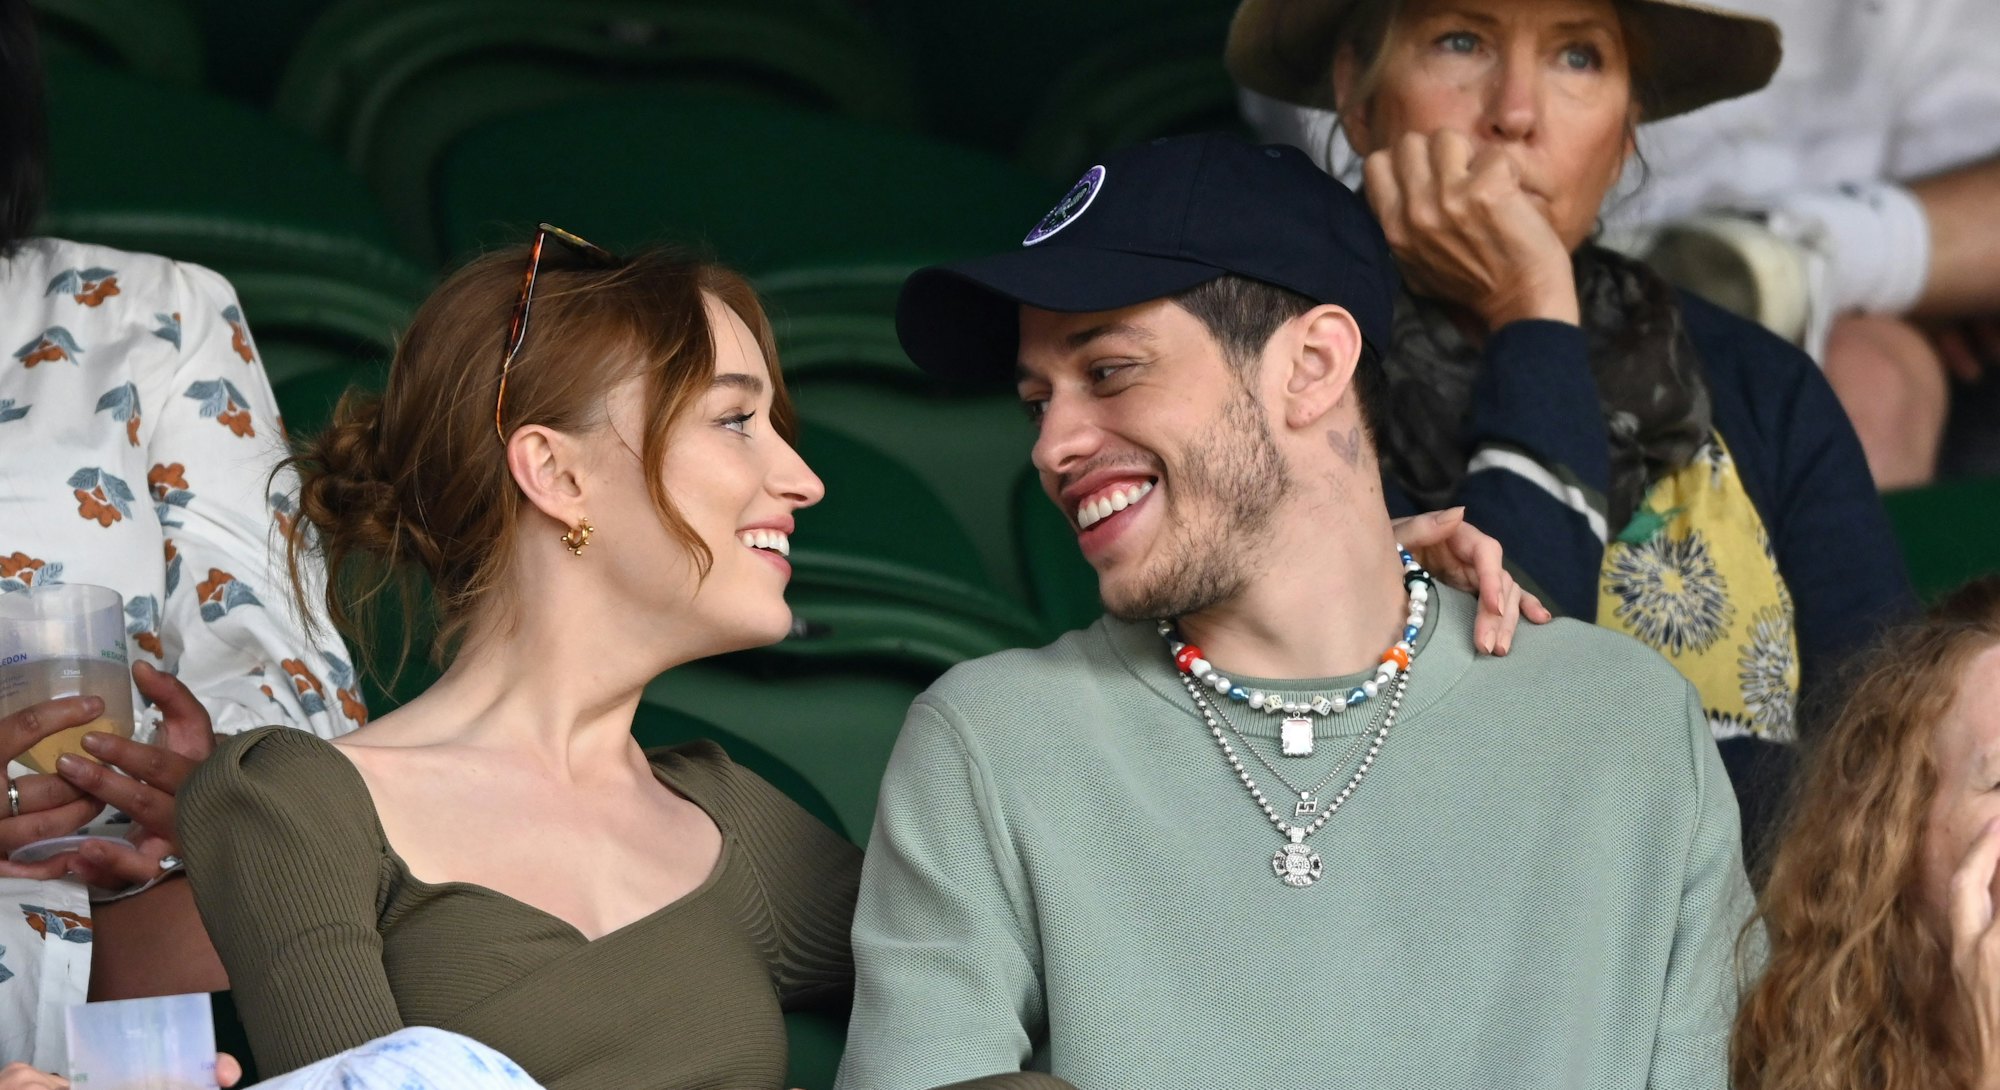 Phoebe Dynevor and Pete Davidson at Wimbledon in 2021